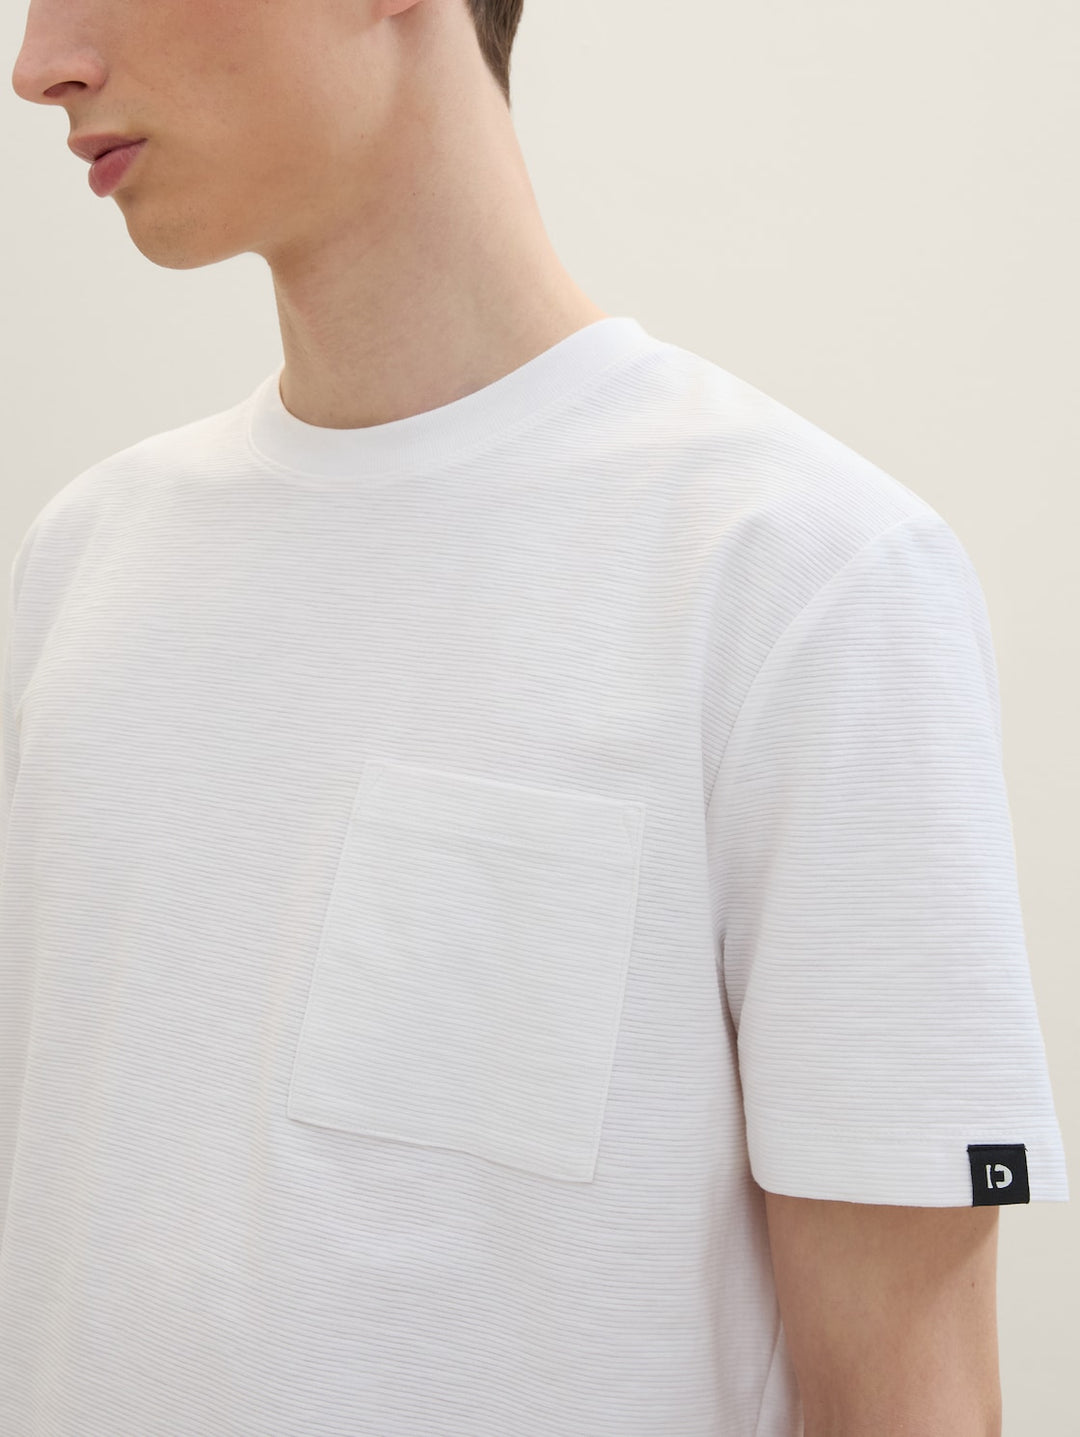 STRUCTURED T-SHIRT WITH POCKET